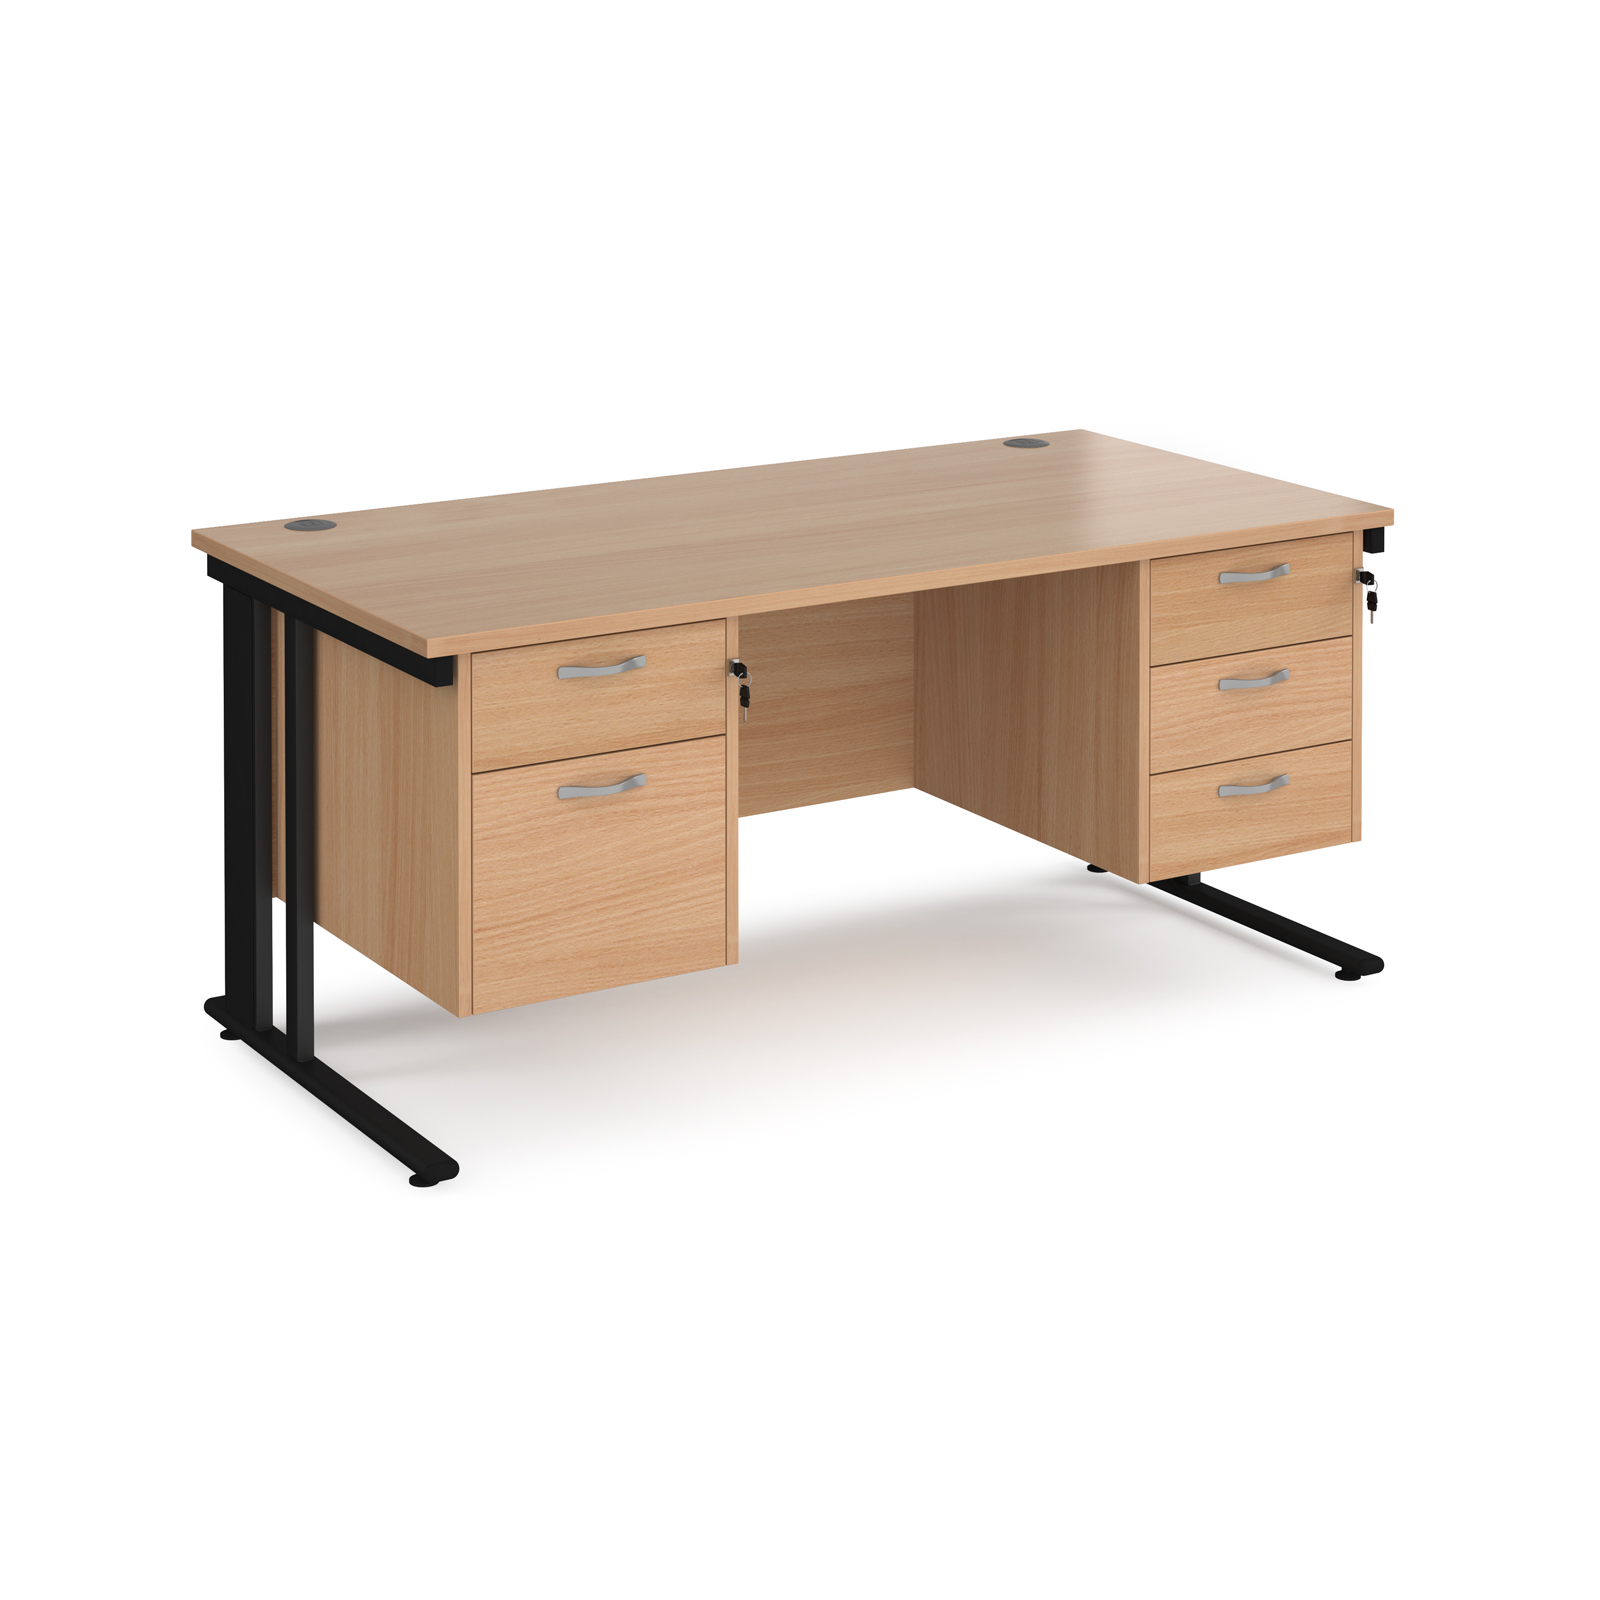 Maestro 25 straight desk 1600mm x 800mm with 2 and 3 drawer pedestals - black cable managed leg frame, beech top